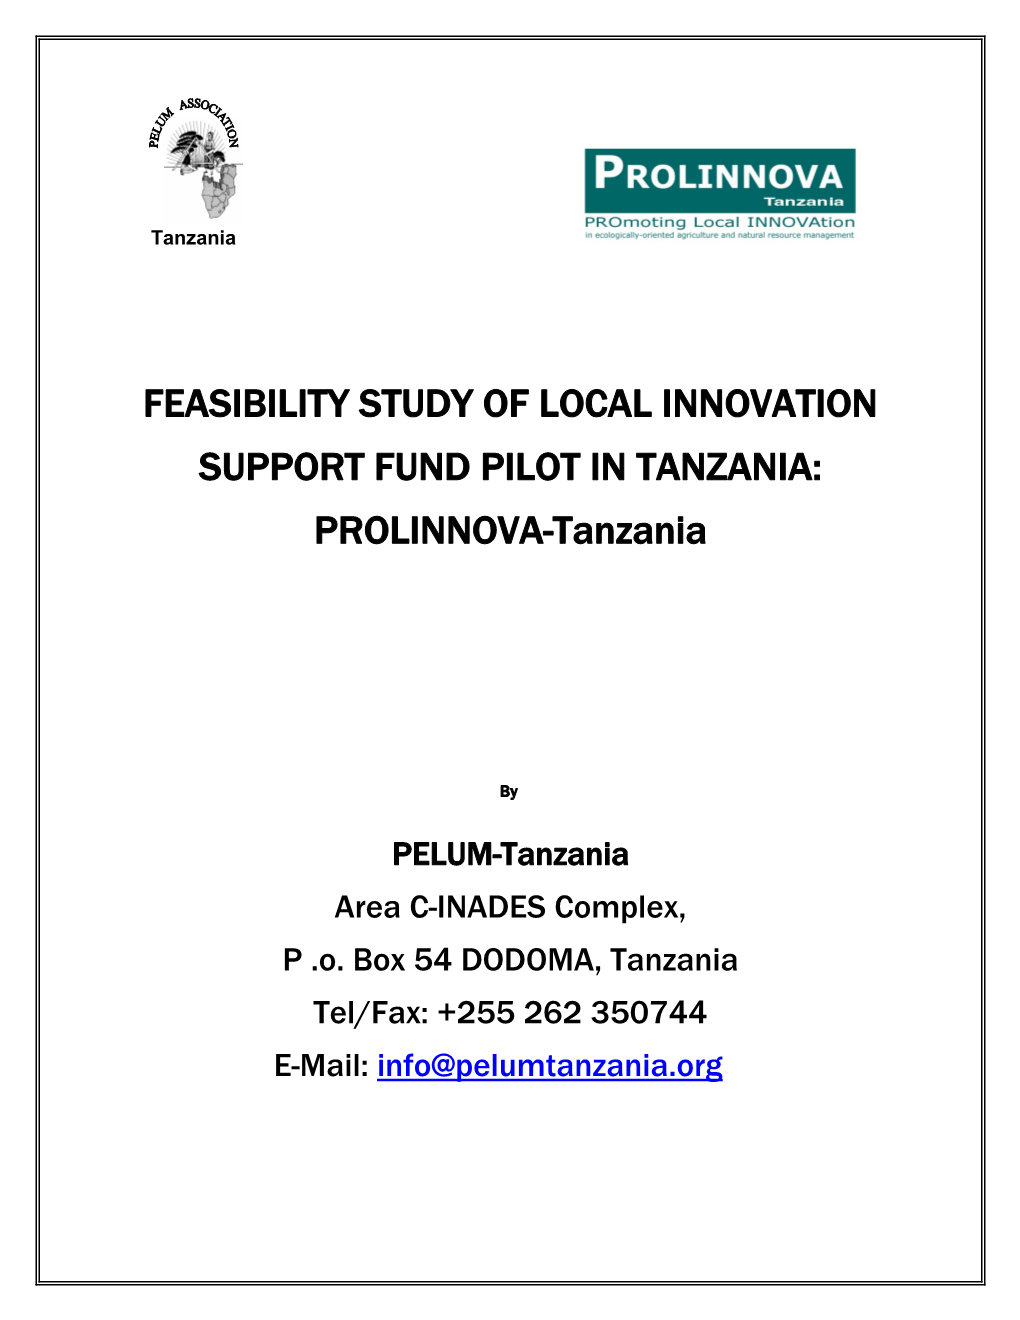 Feasibility Study Report on Local Innovation Support Fund